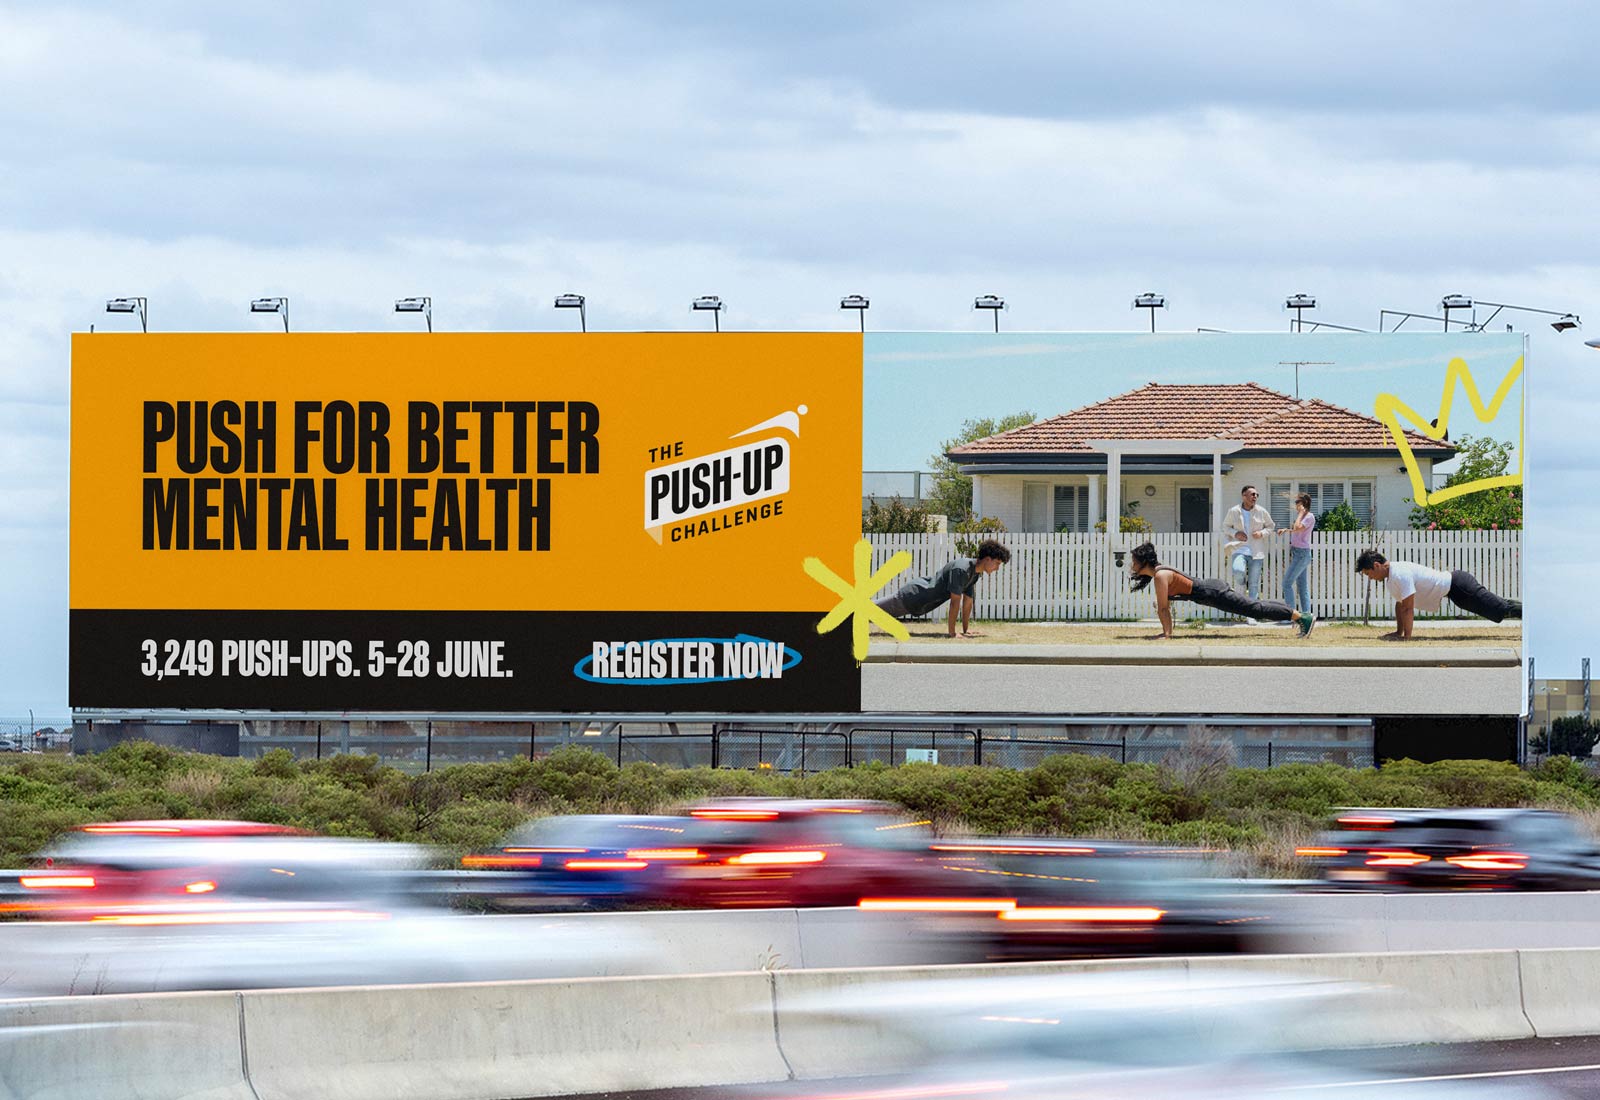 A Billboard over looks a busy freeway sporting The Push-Up Challenge brand campaign artwork